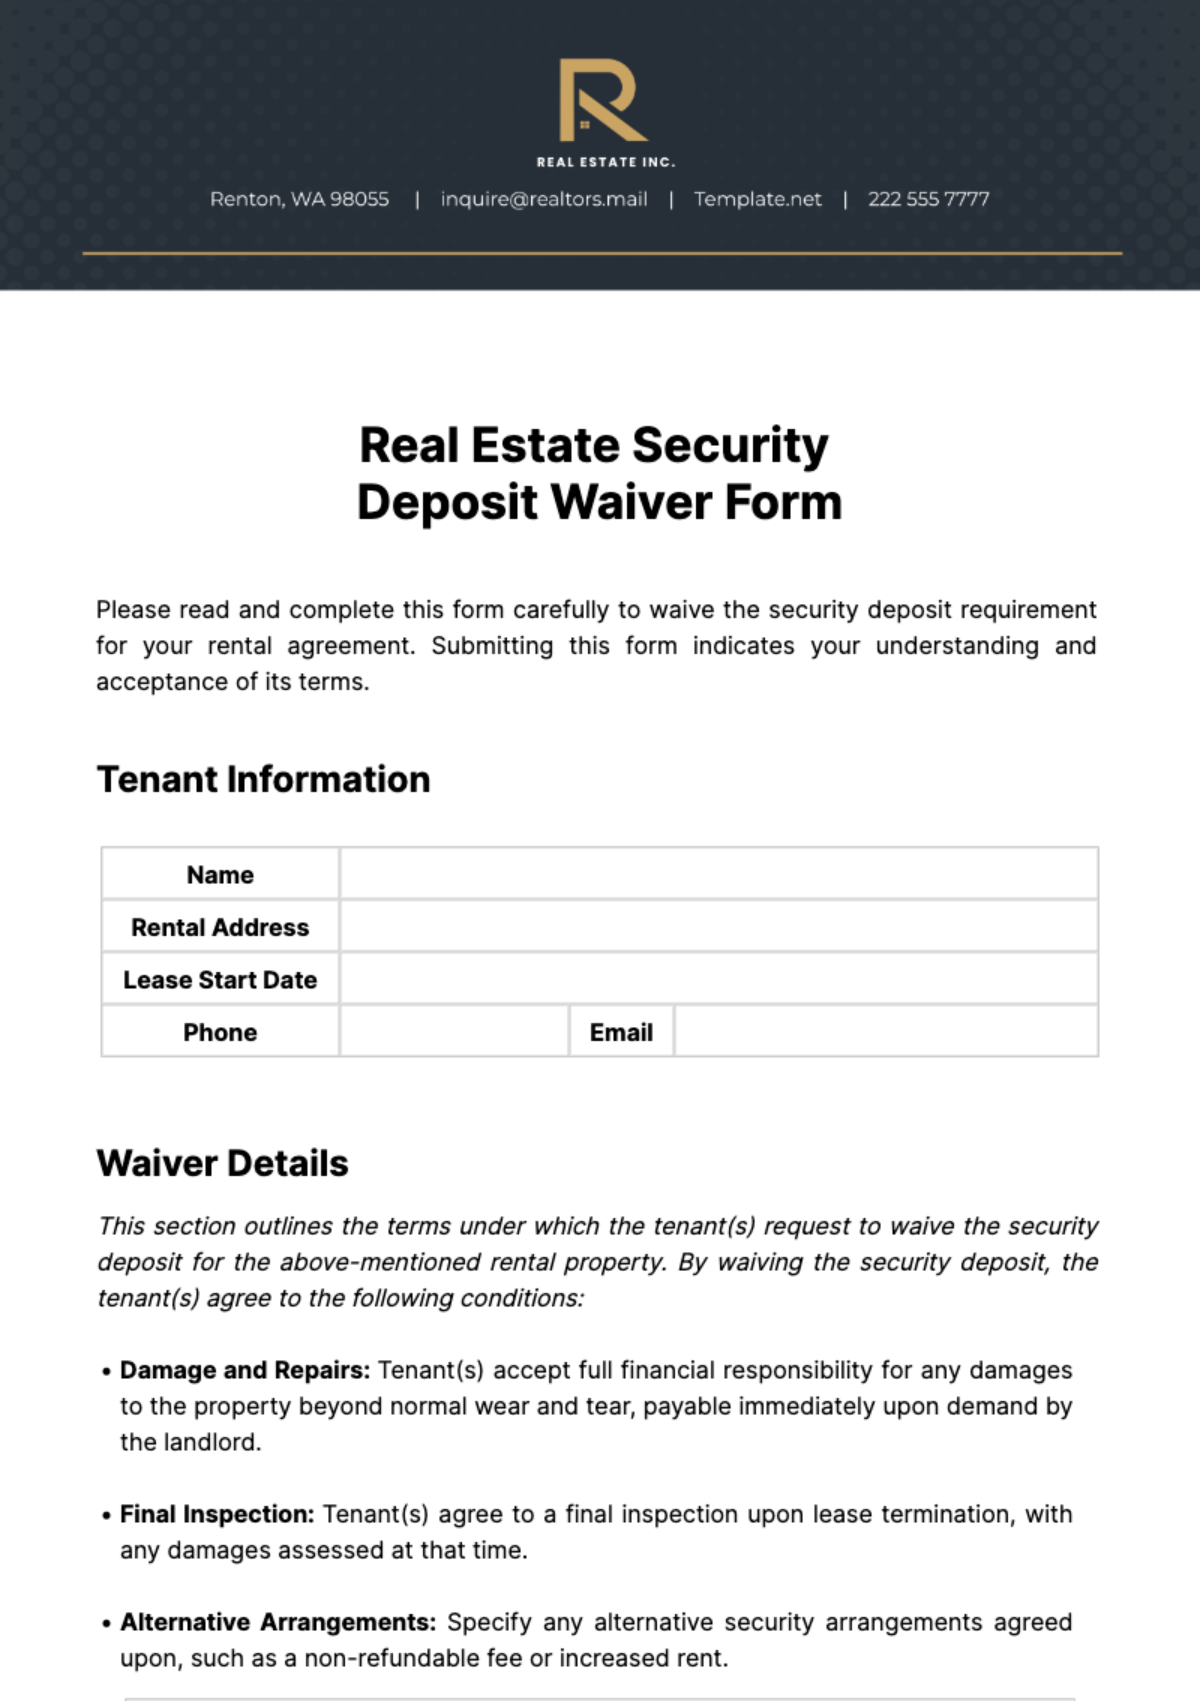 Real Estate Security Deposit Waiver Form Template